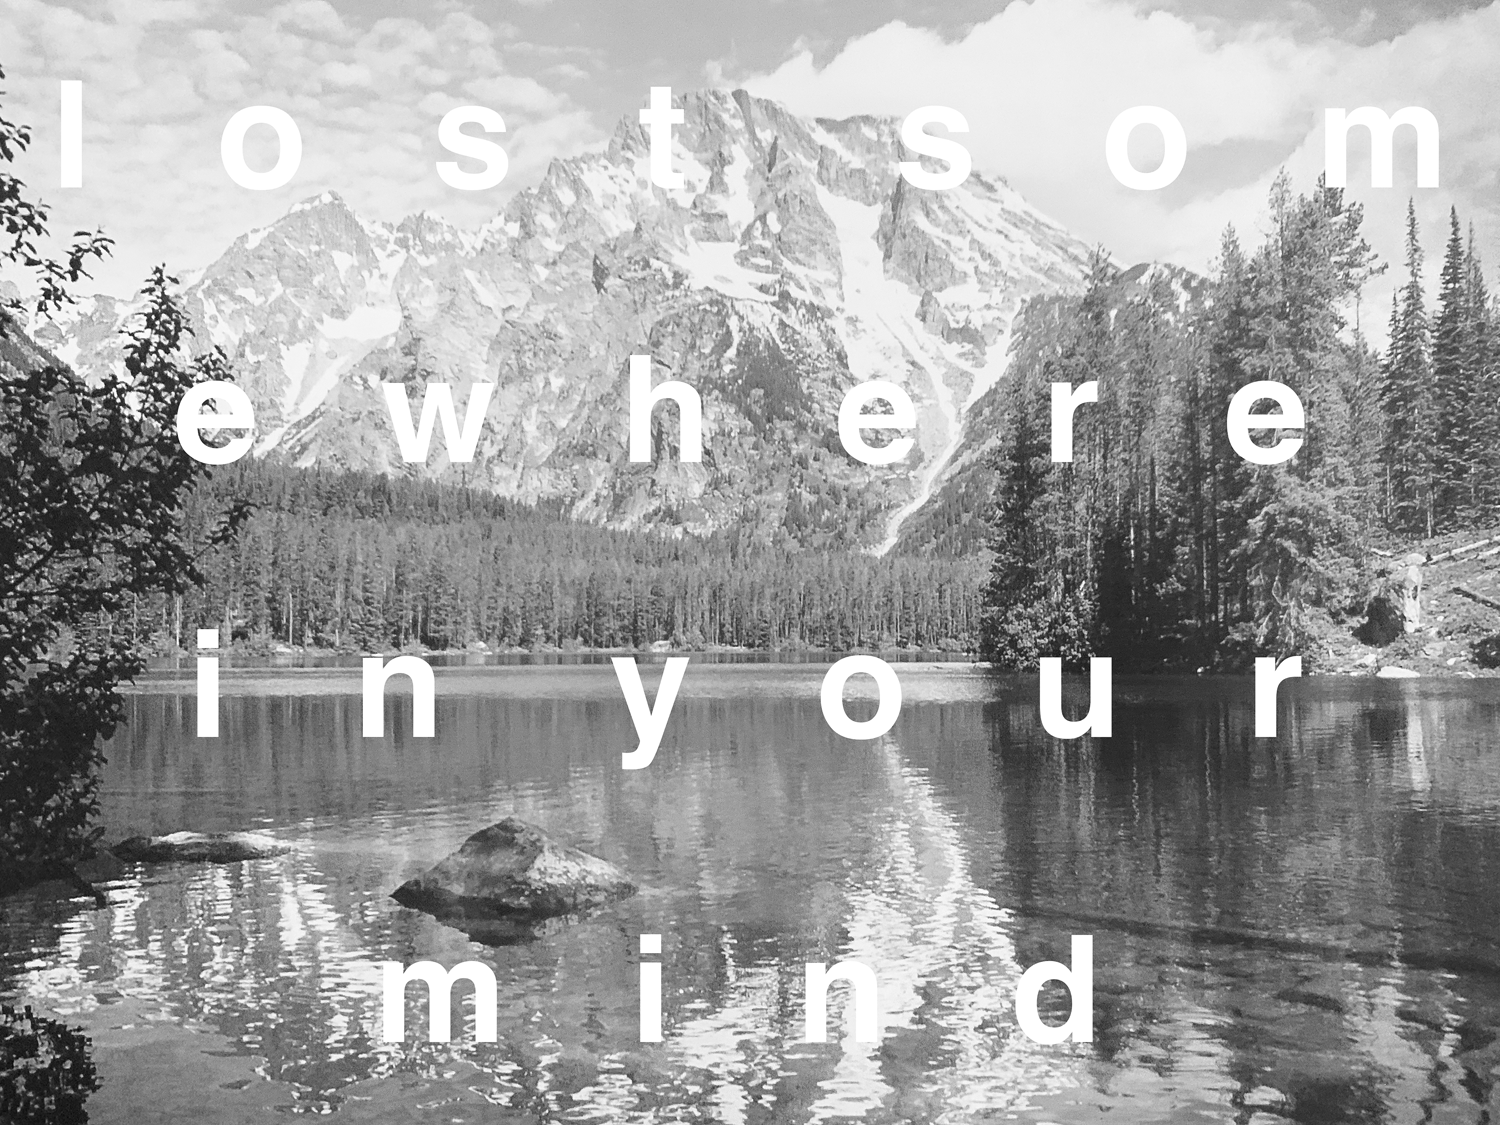 text layered on greyscale lake and mountain landscape